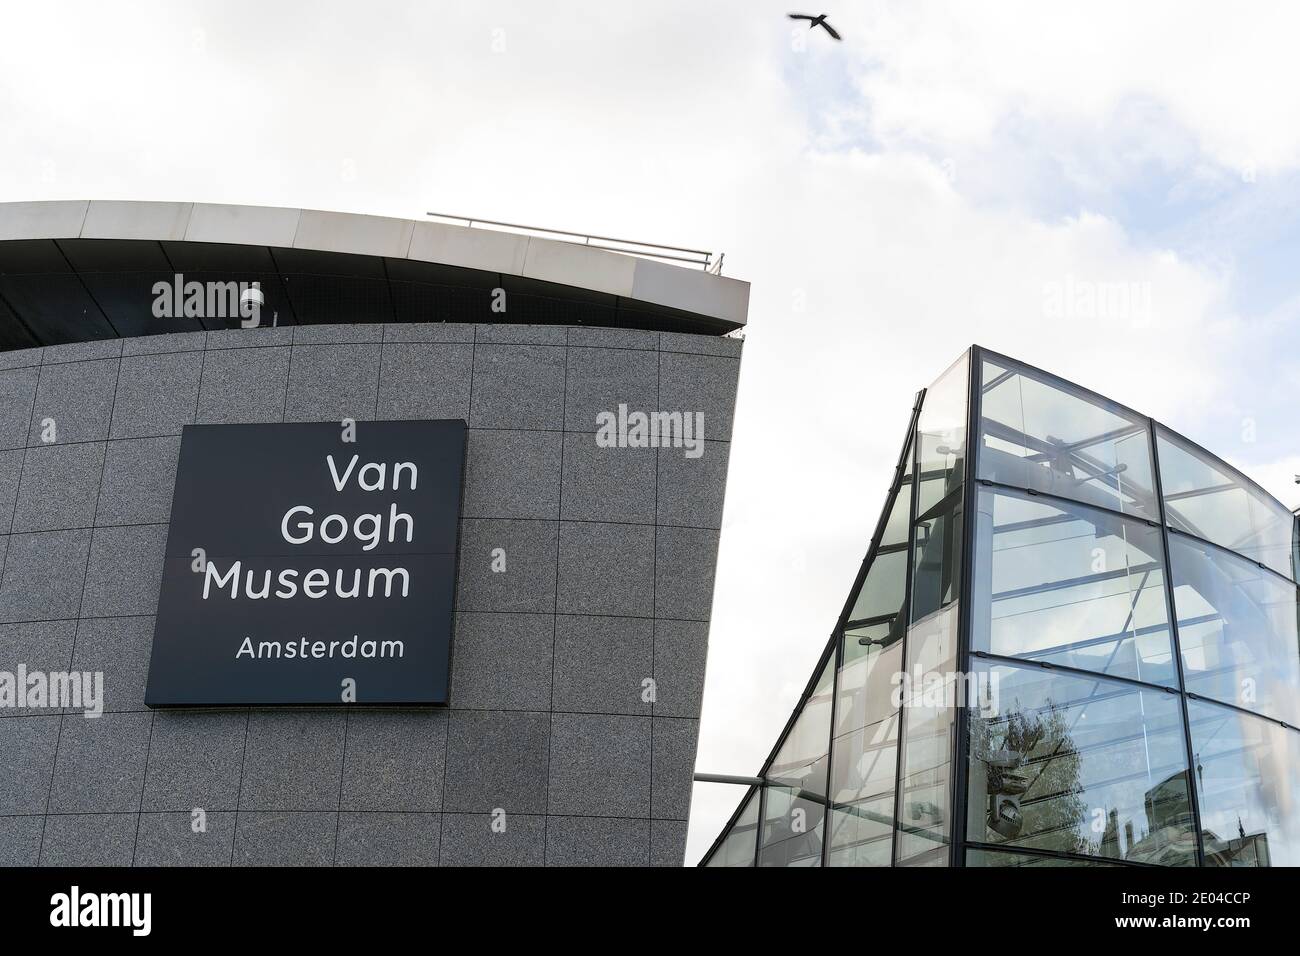 Amsterdam, the Netherlands - October 18, 2018: Close up of the Van Gogh Museum in Amsterdam,  displaying Van Gogh’s artwork a populair and famous dutc Stock Photo